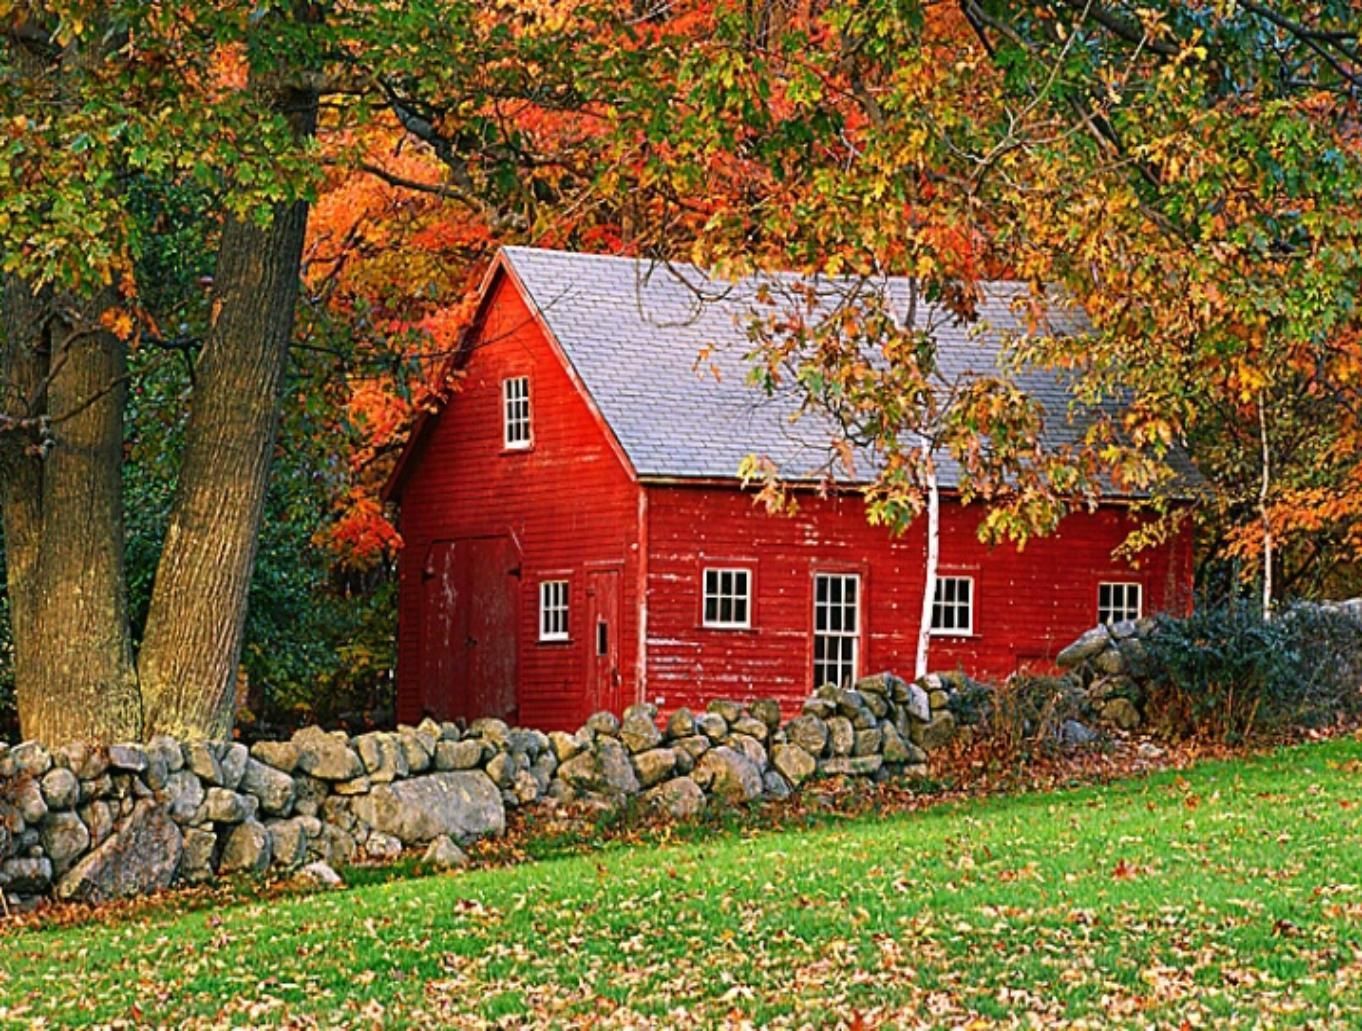 picture of barns in the fall Image. Red barns, Farm barn, New england